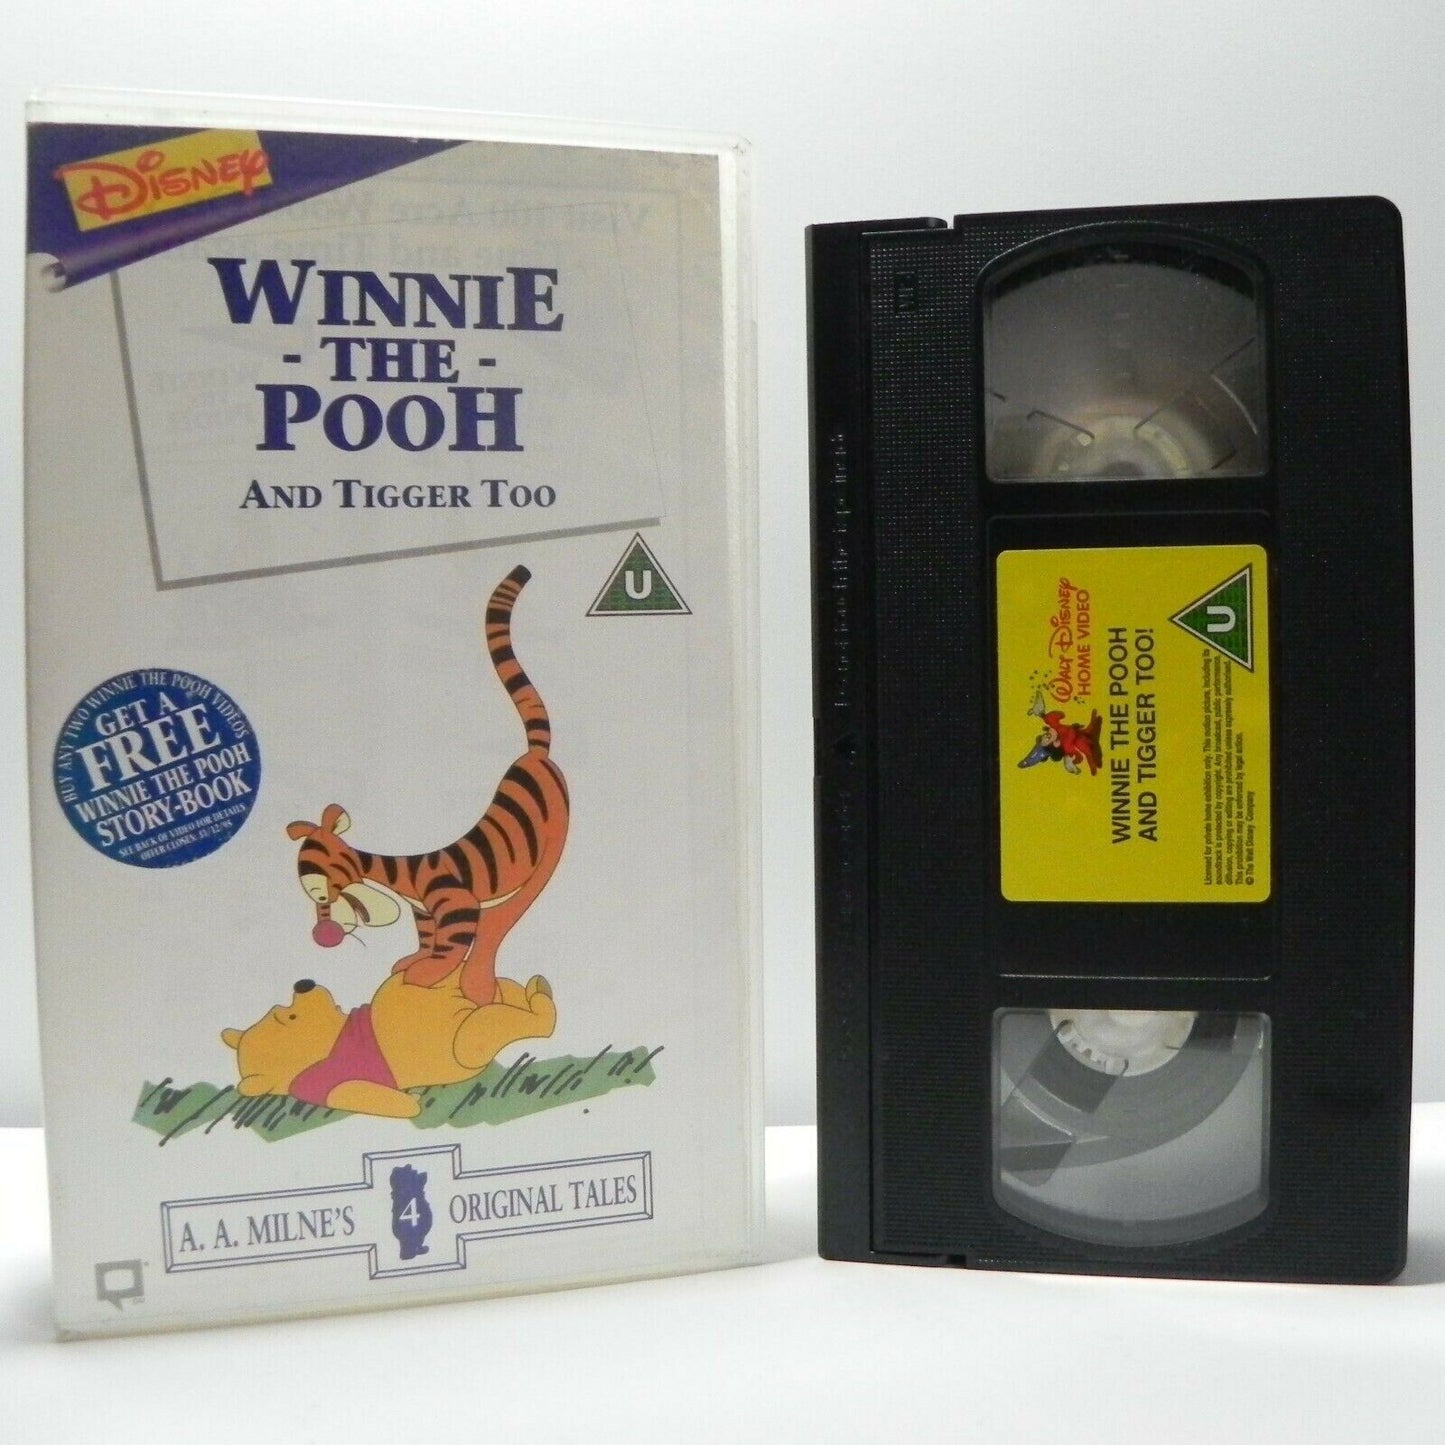 Winnie The Pooh And Tigger Too - A.A. Milne's Original Tales - Children's - VHS-